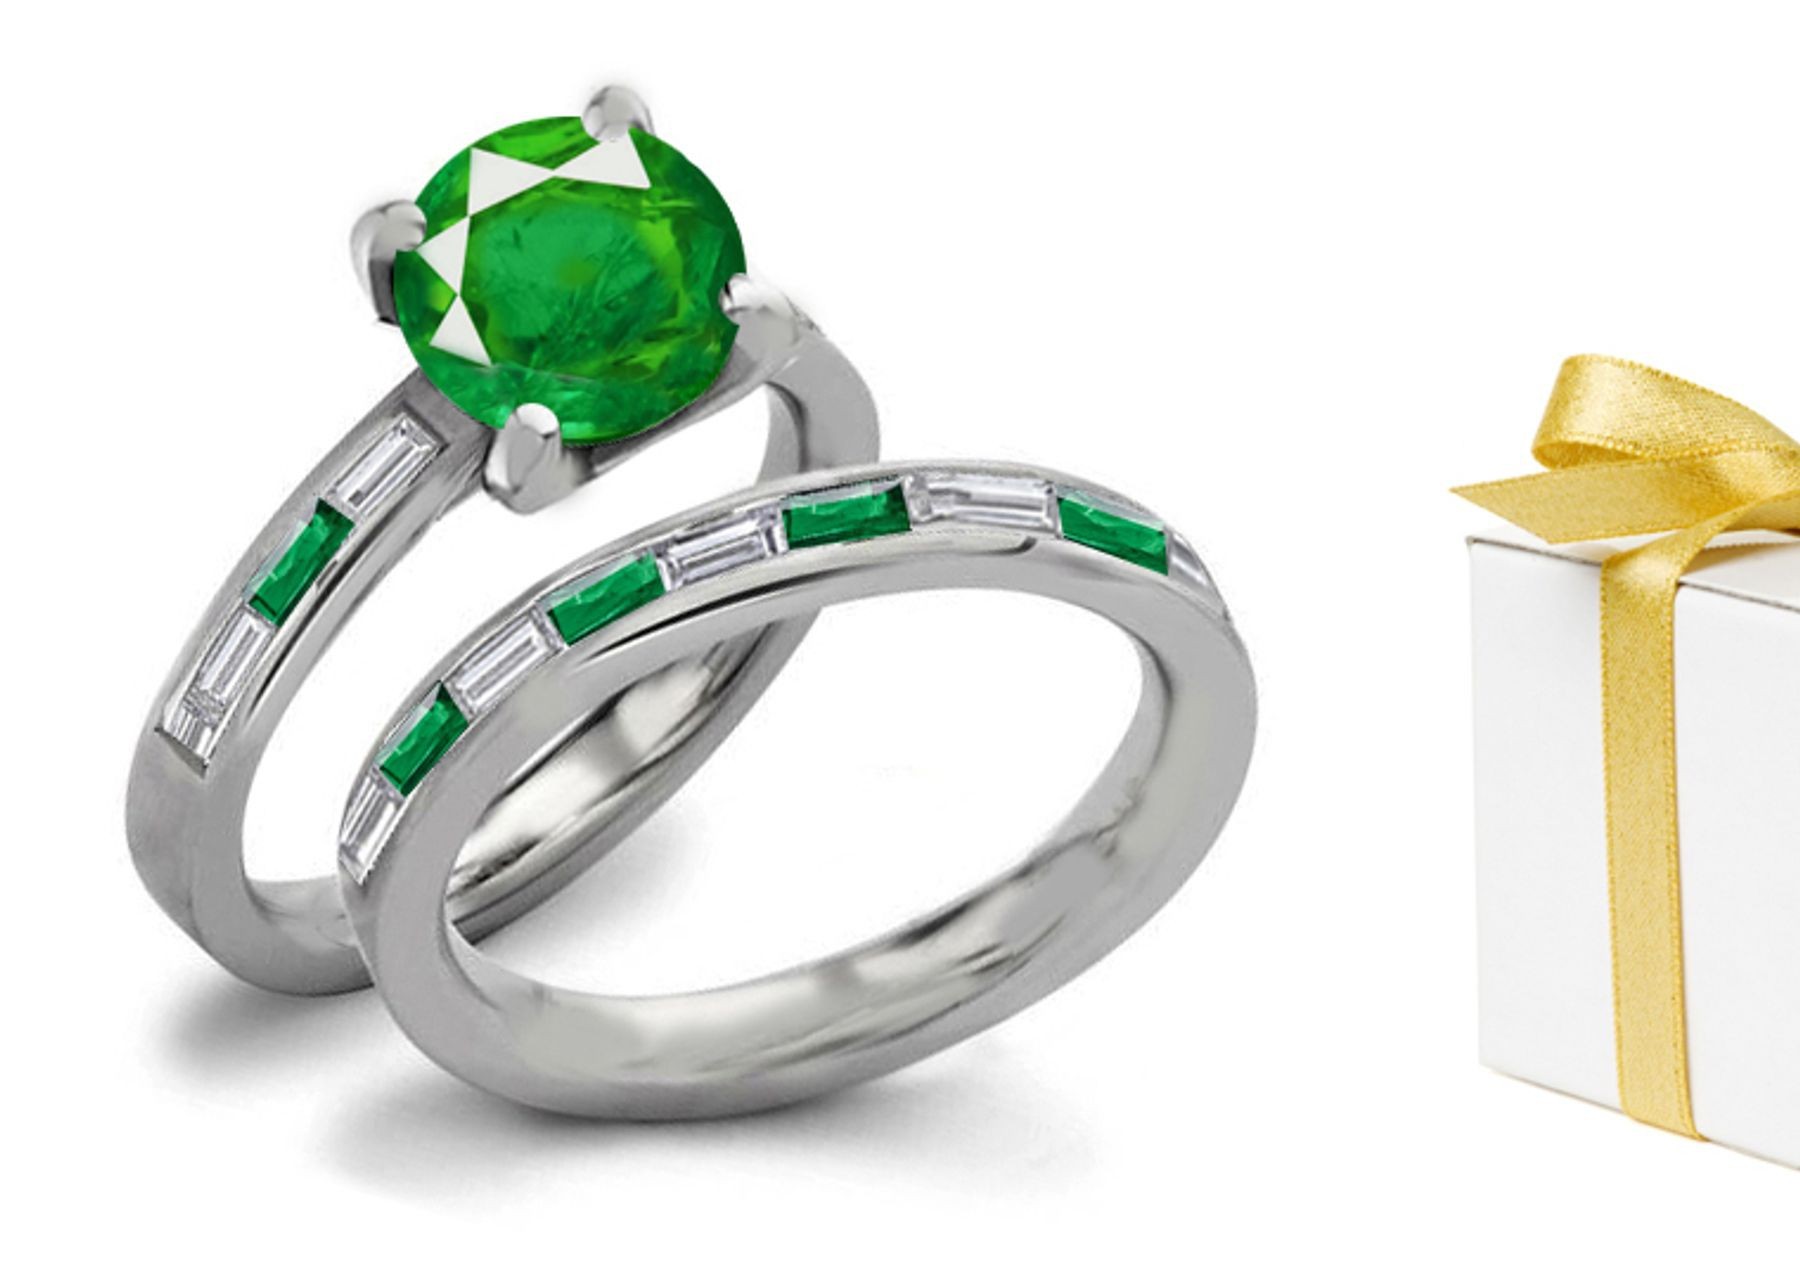 Various Creations: Stunning Composition Cut in Half Rounded Shape True Emerald Ring With Diamonds in 14k White Gold 